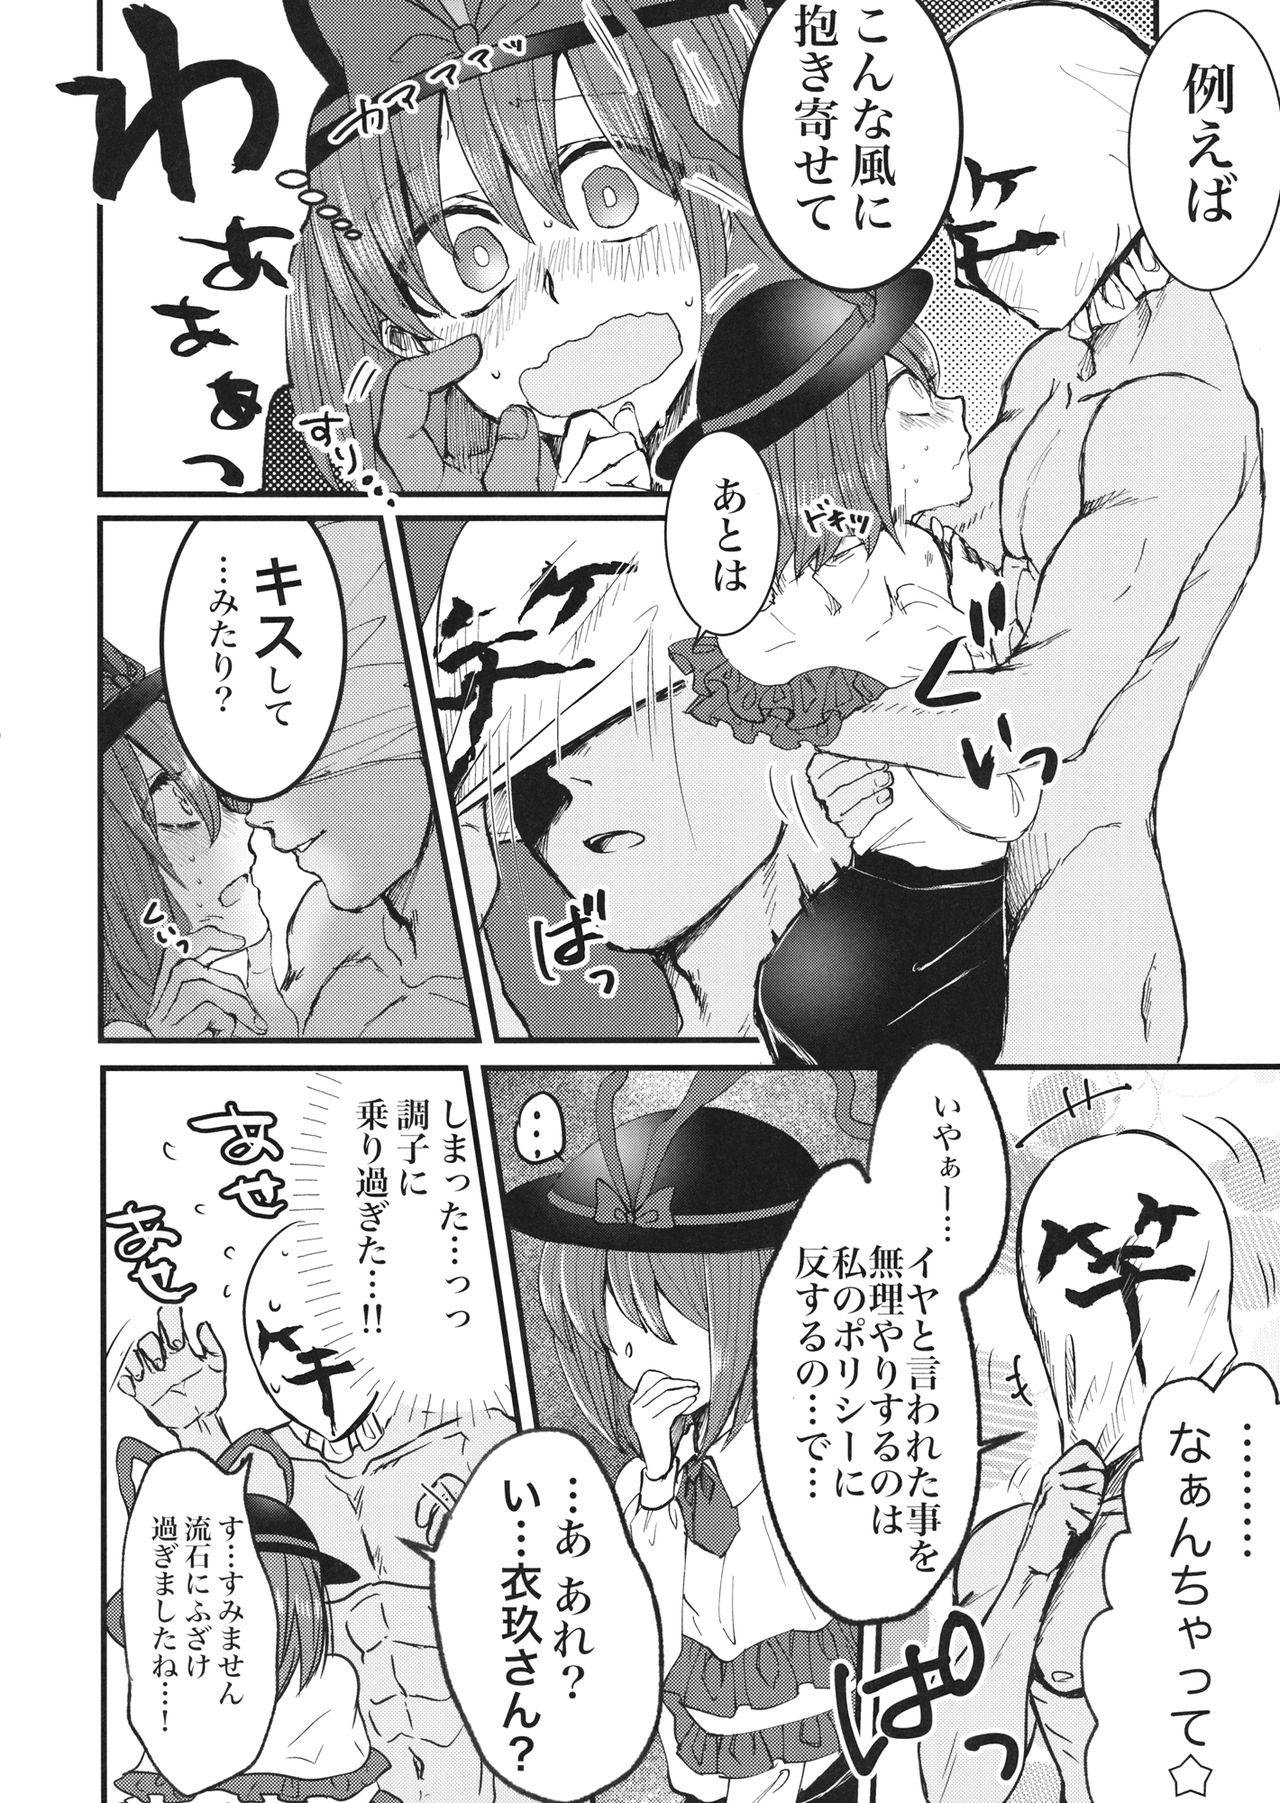 Game 衣玖さんと一緒に色々頑張る本 - Touhou project Private Sex - Page 9